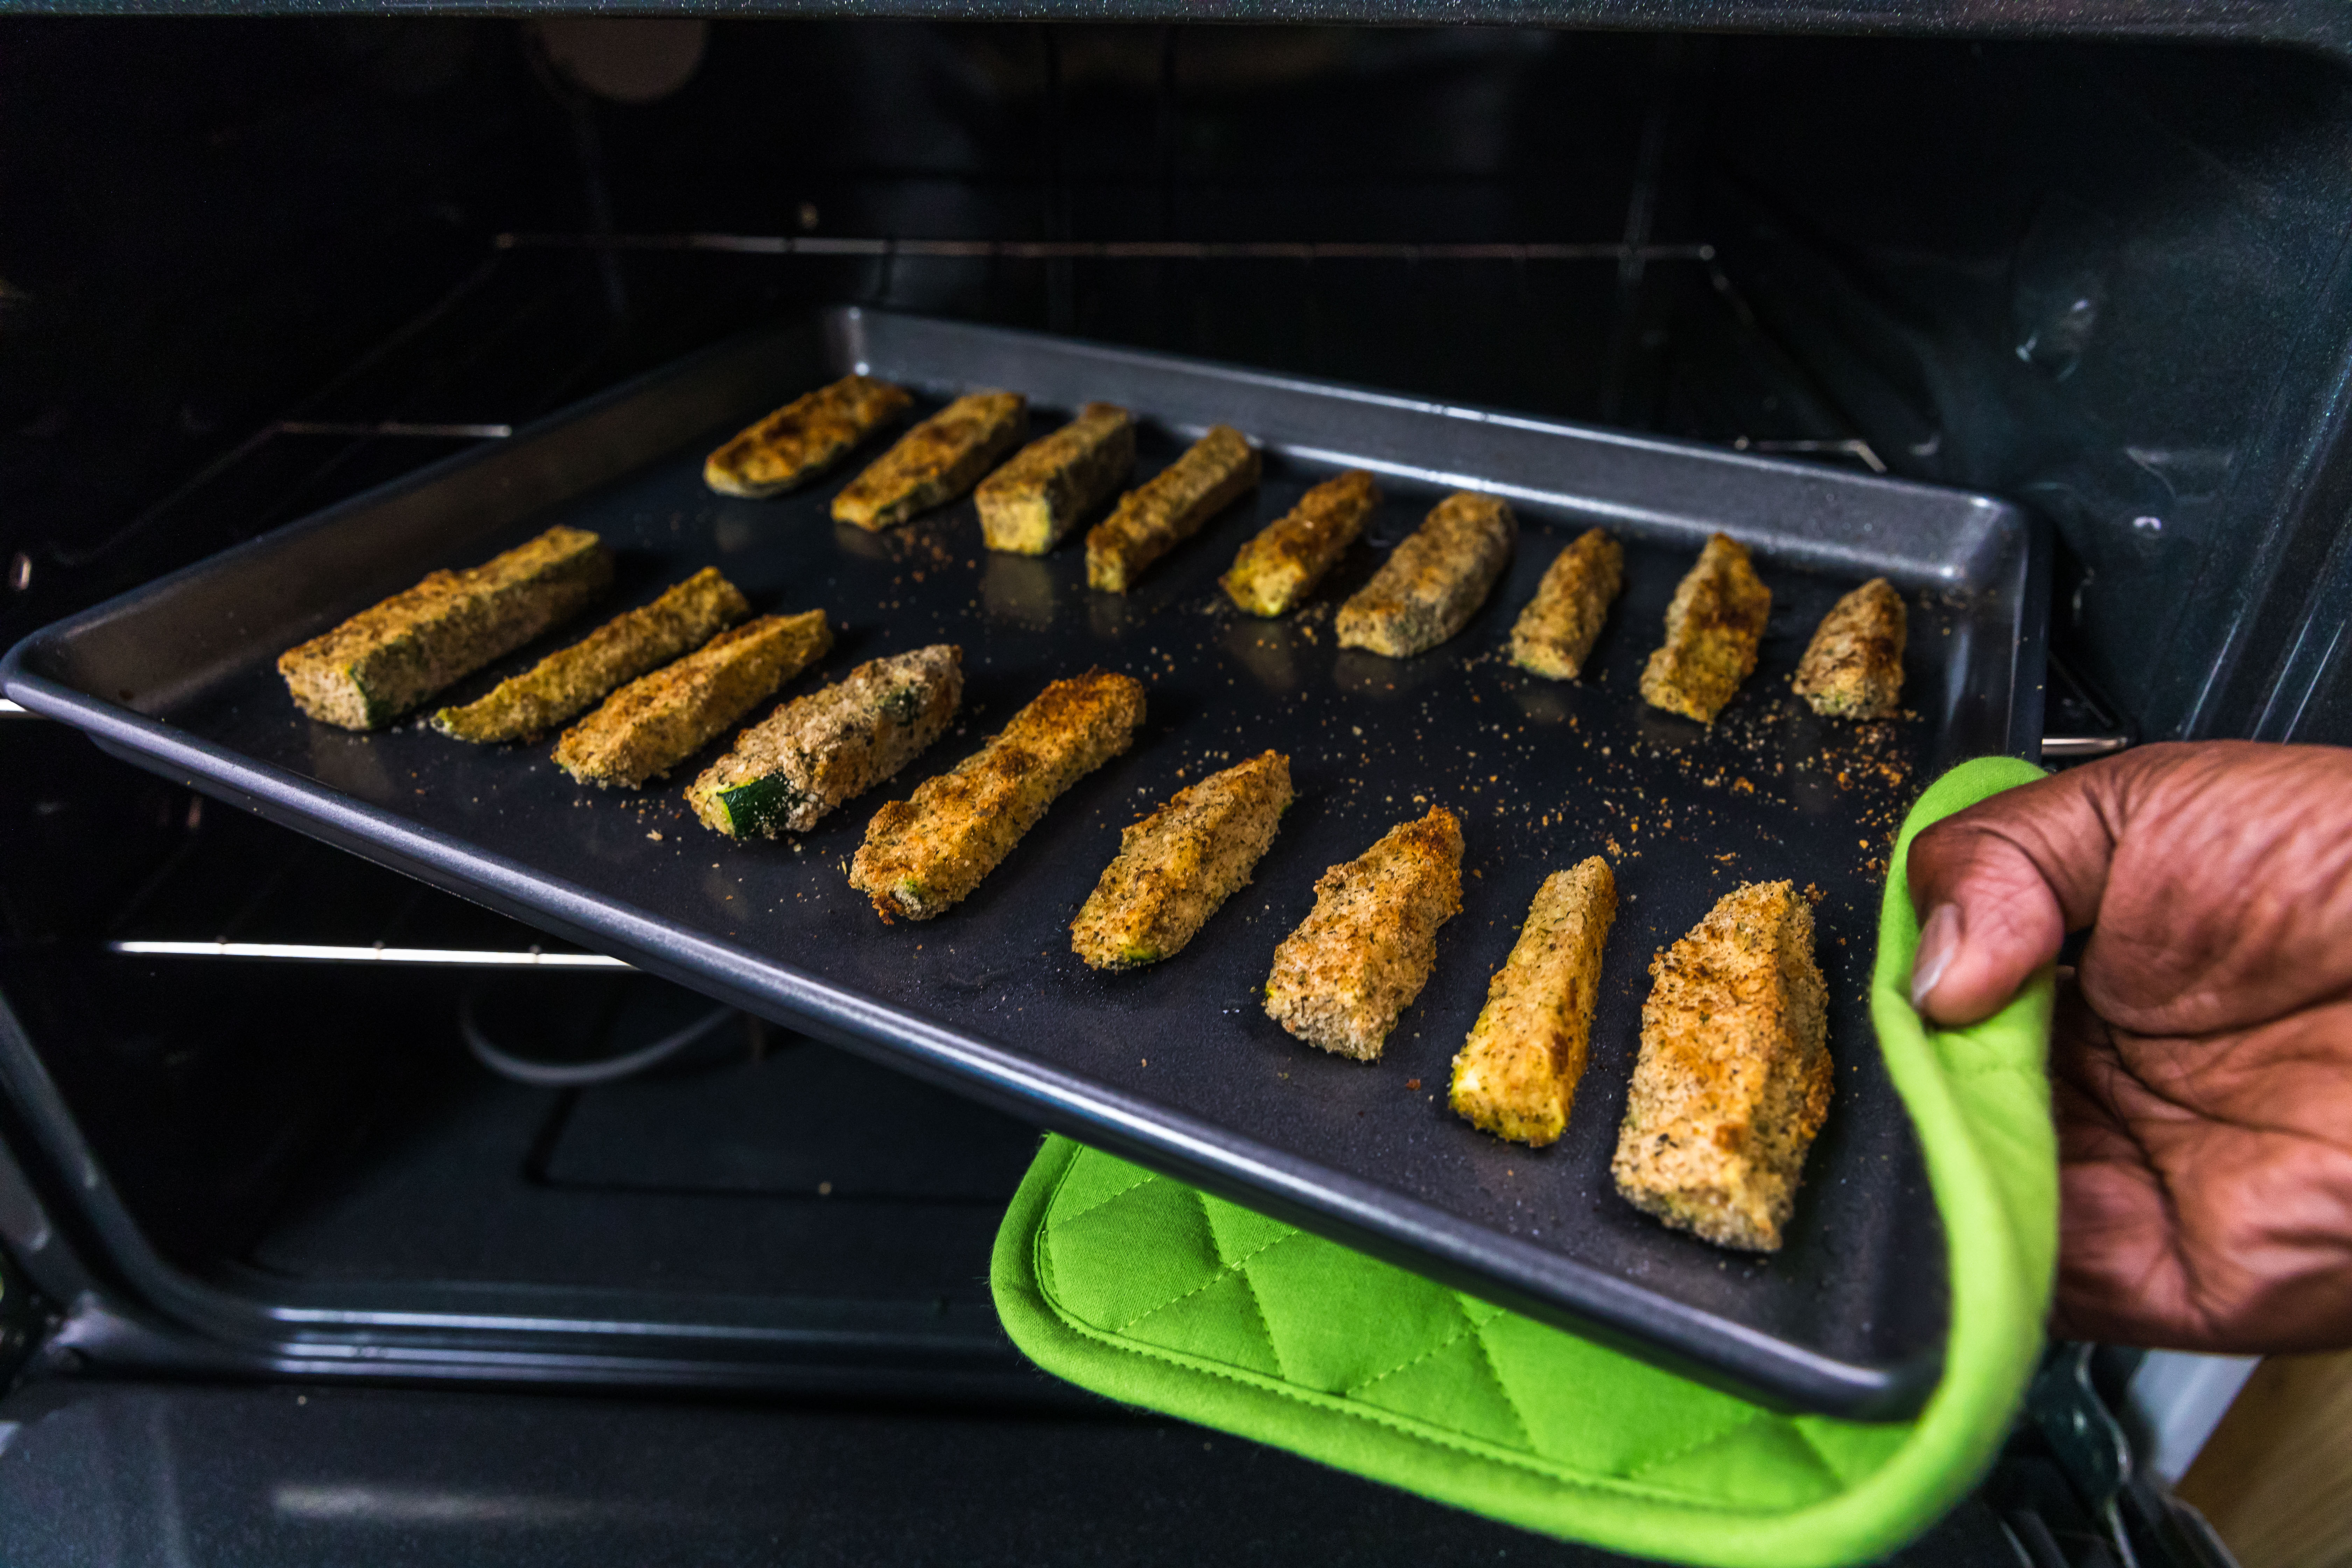 Roasted zucchini on a baking sheet in the oven